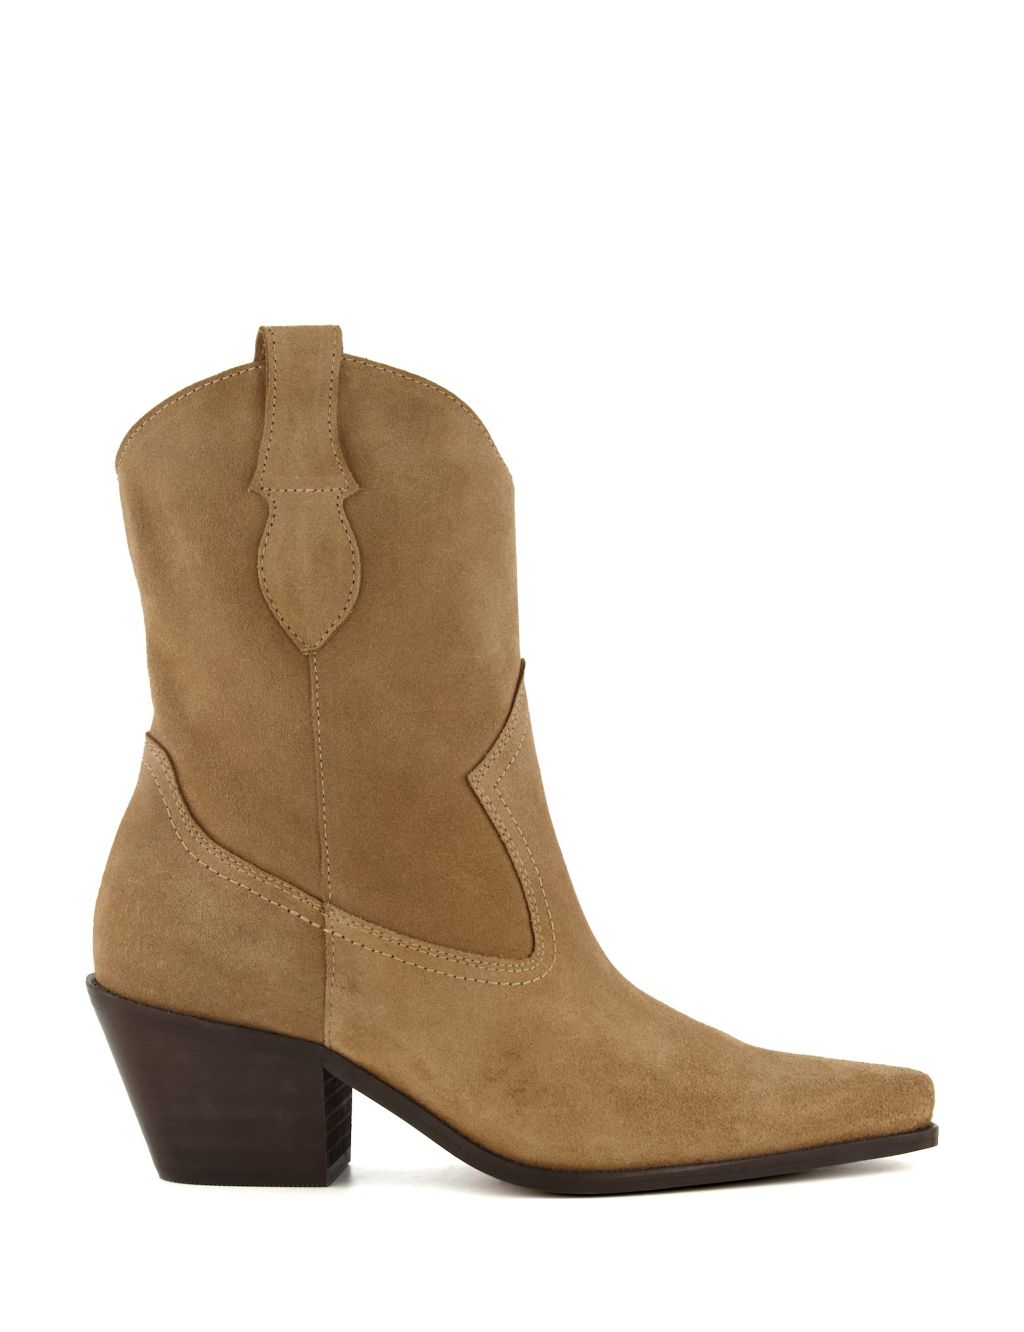 Suede Pull On Western Boots image 1